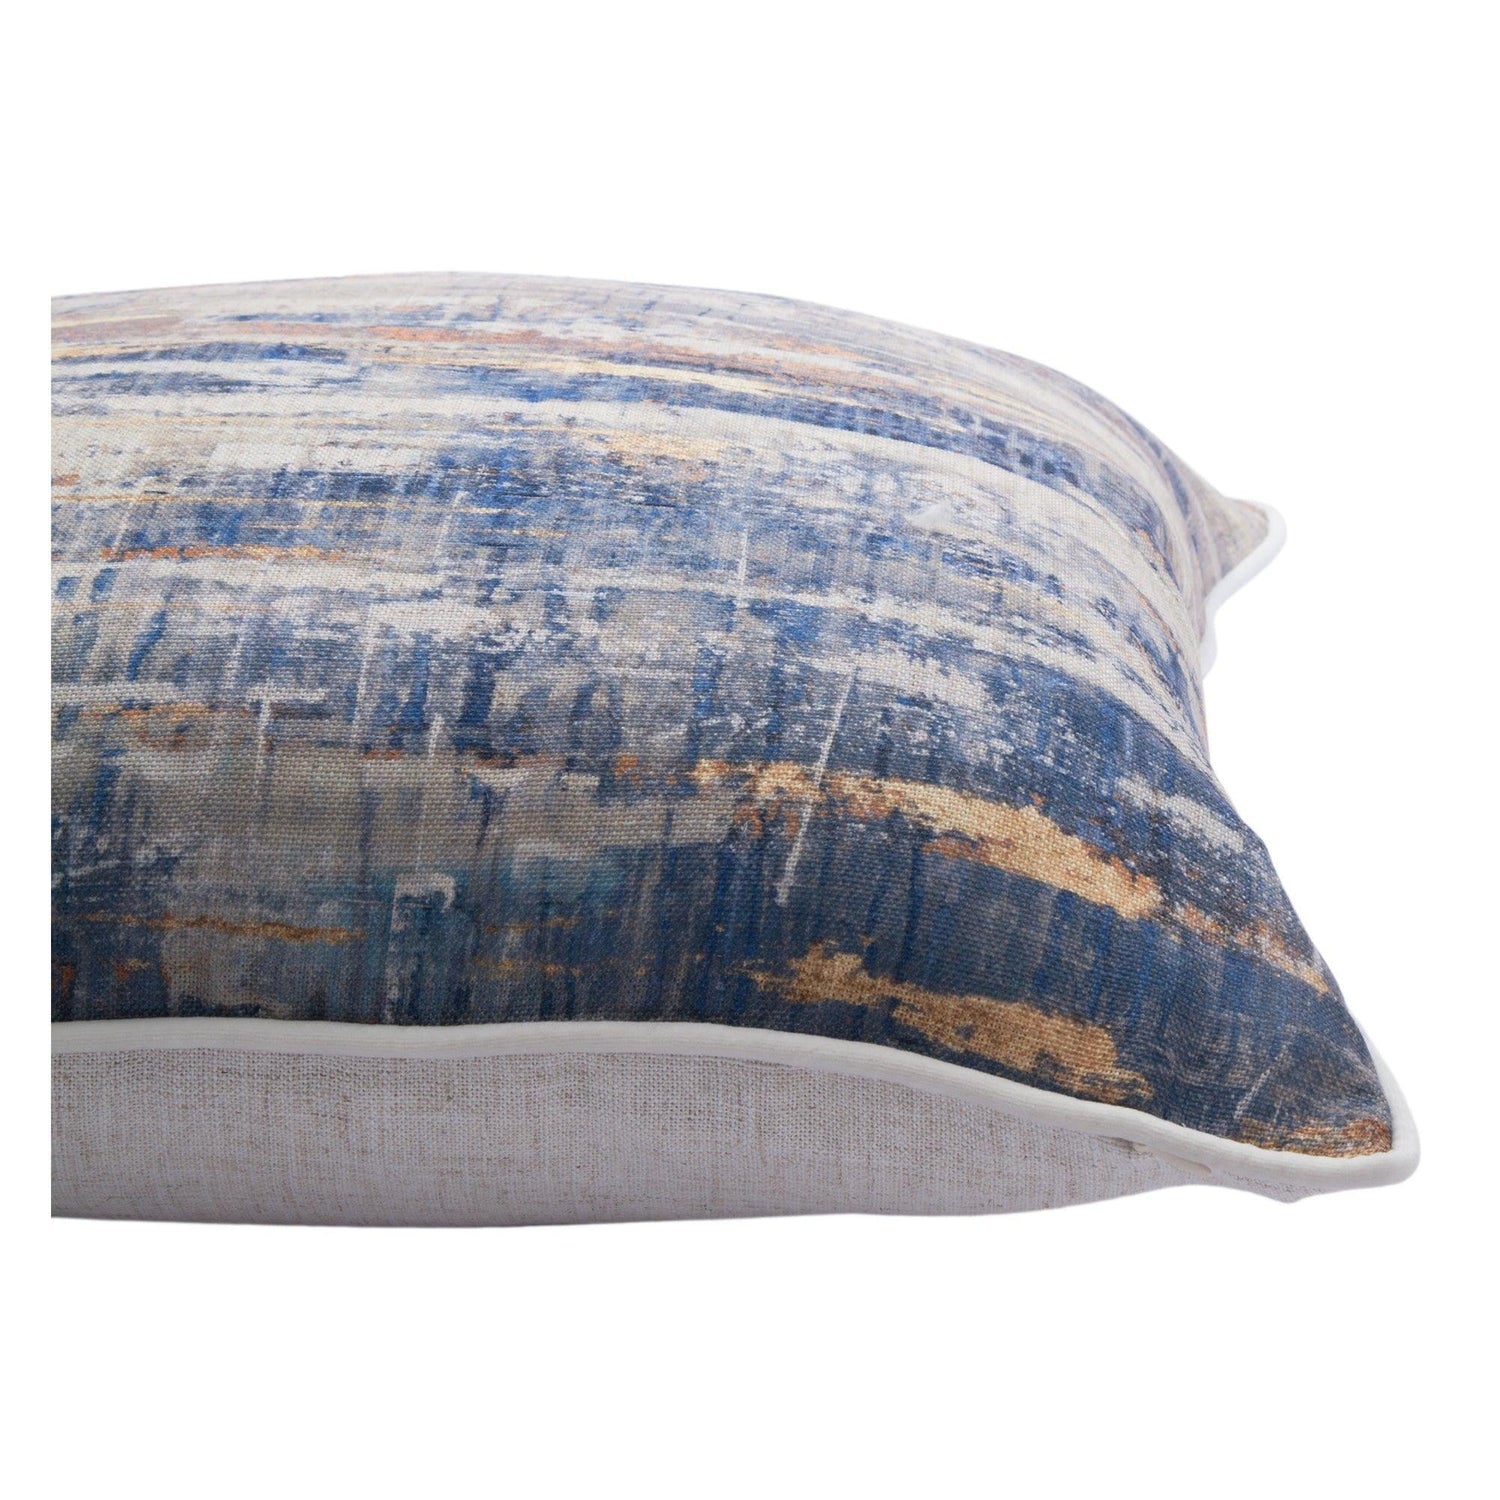 Montreal Lighting & Hardware - Adrienne Pillow by Renwil - Montreal Lighting & Hardware